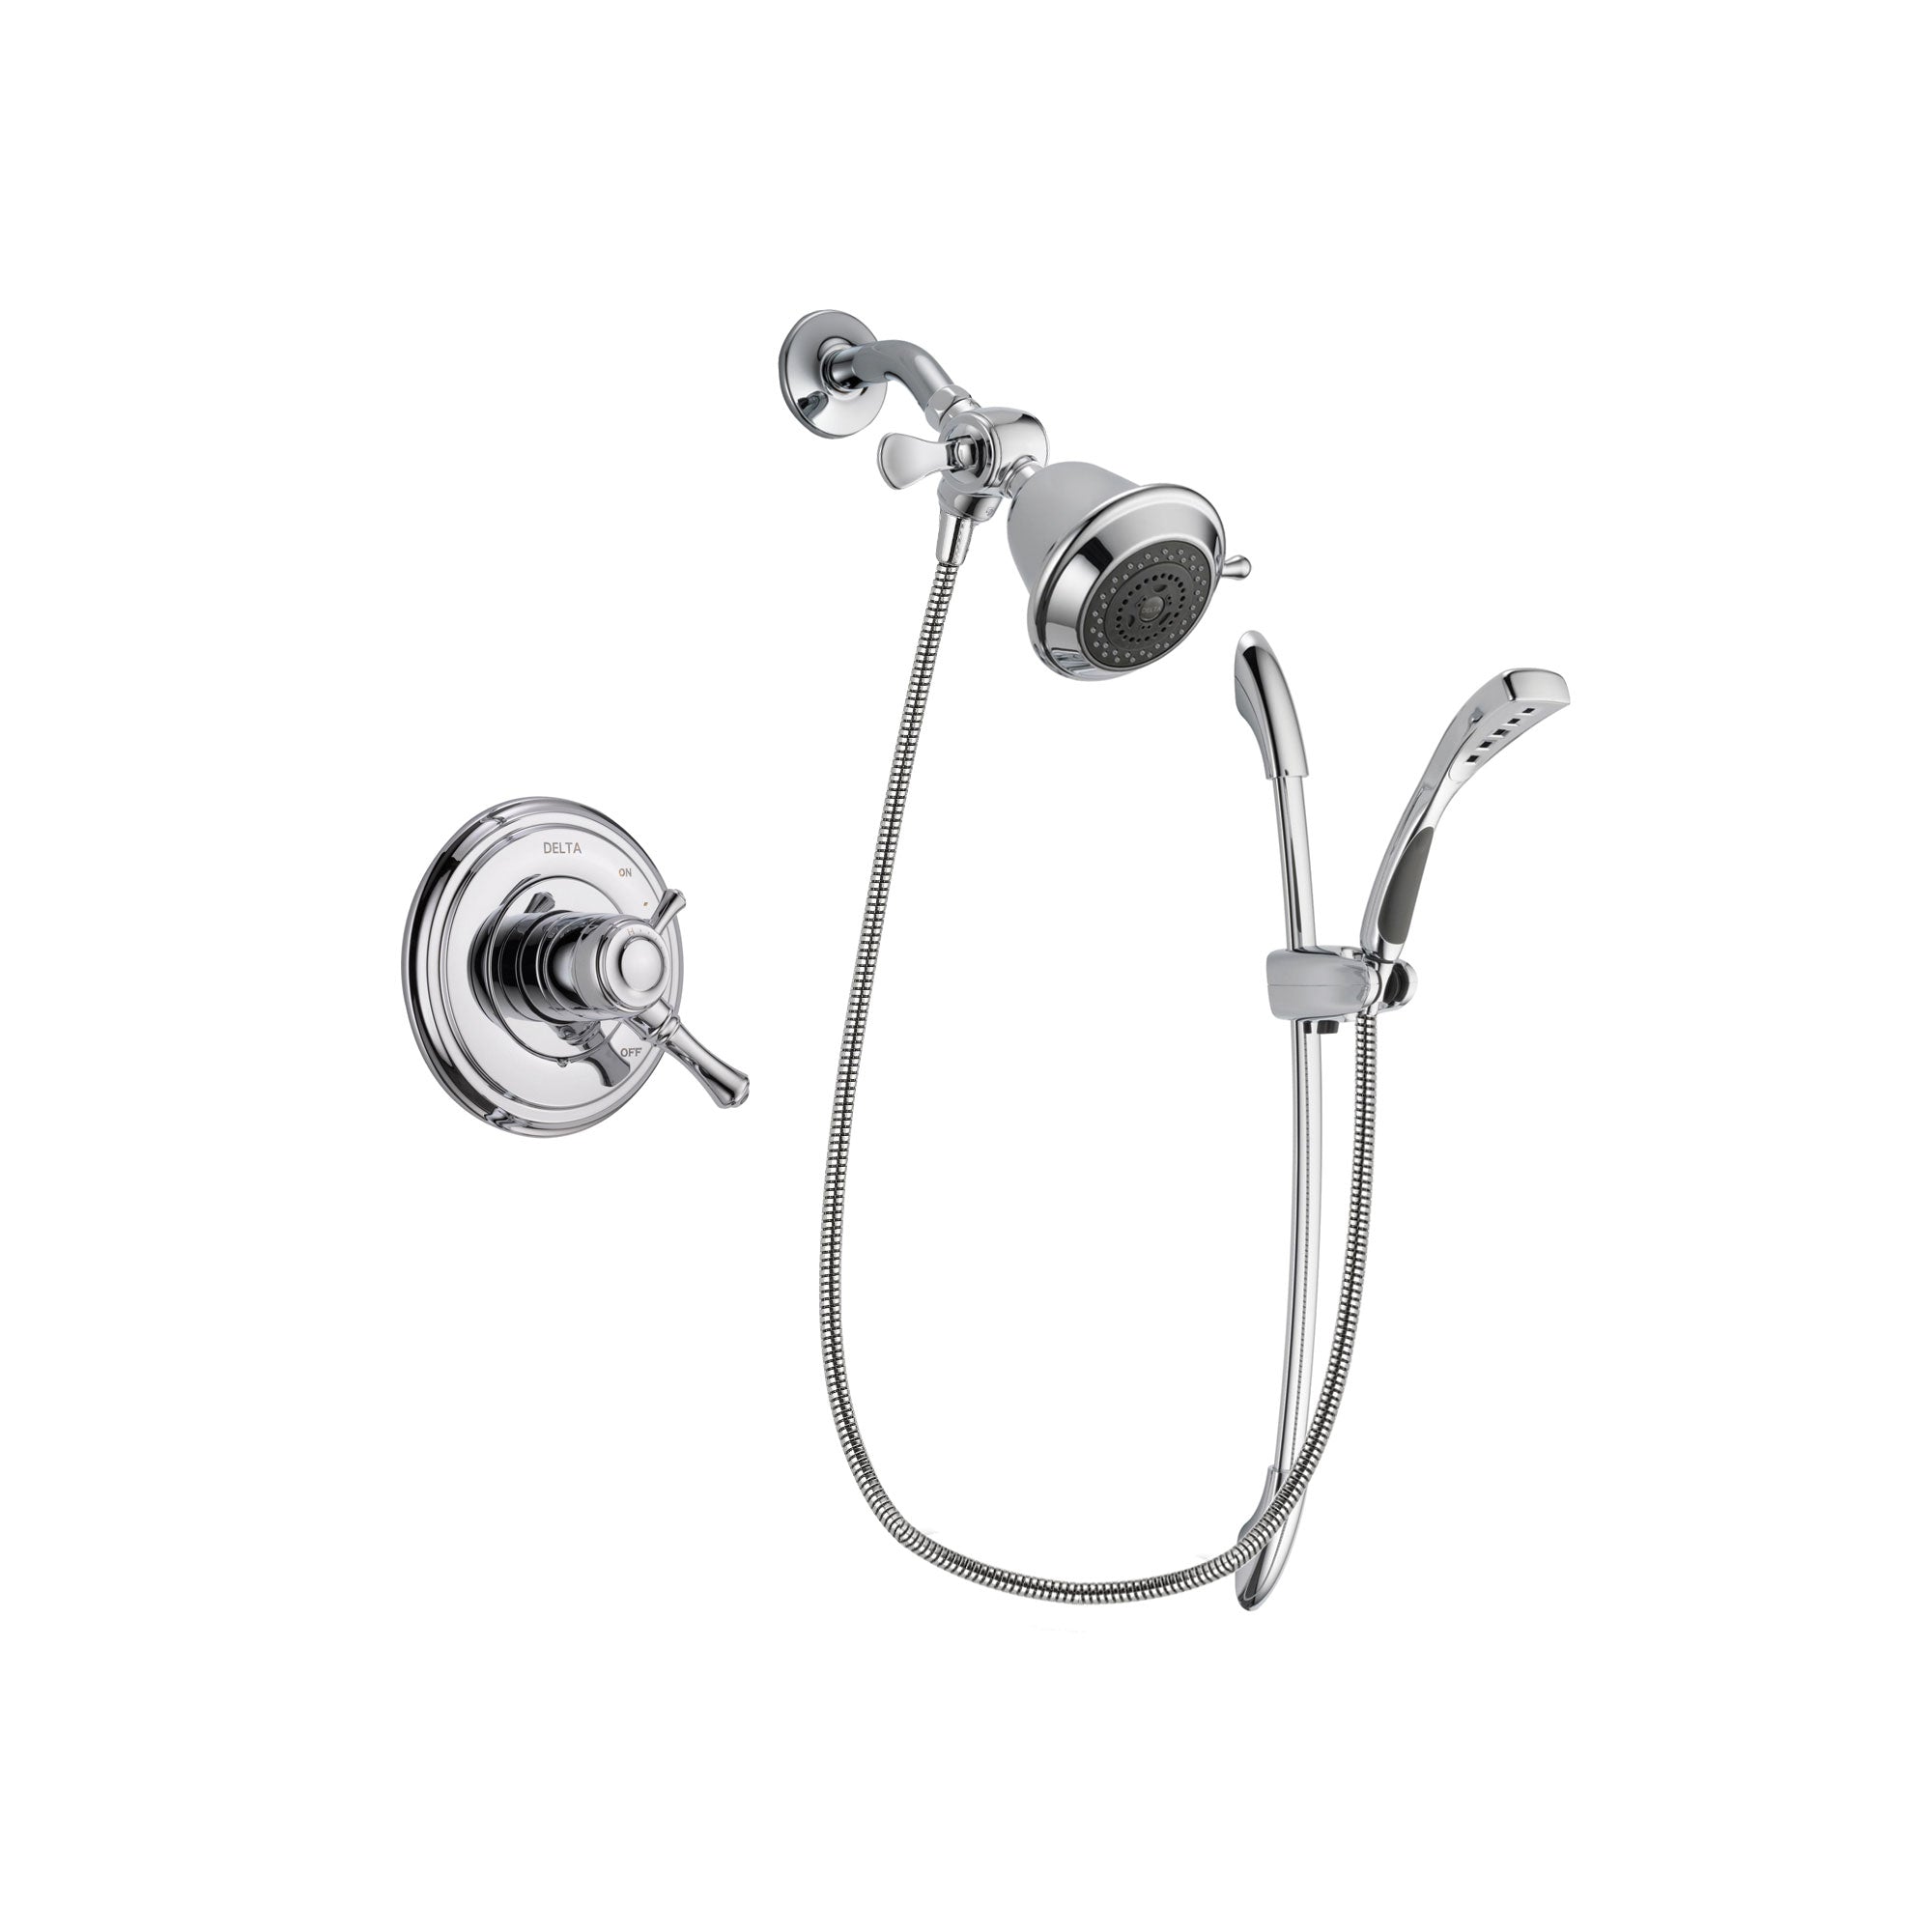 Delta Cassidy Chrome Finish Dual Control Shower Faucet System Package with Shower Head and Handheld Shower with Slide Bar Includes Rough-in Valve DSP0458V